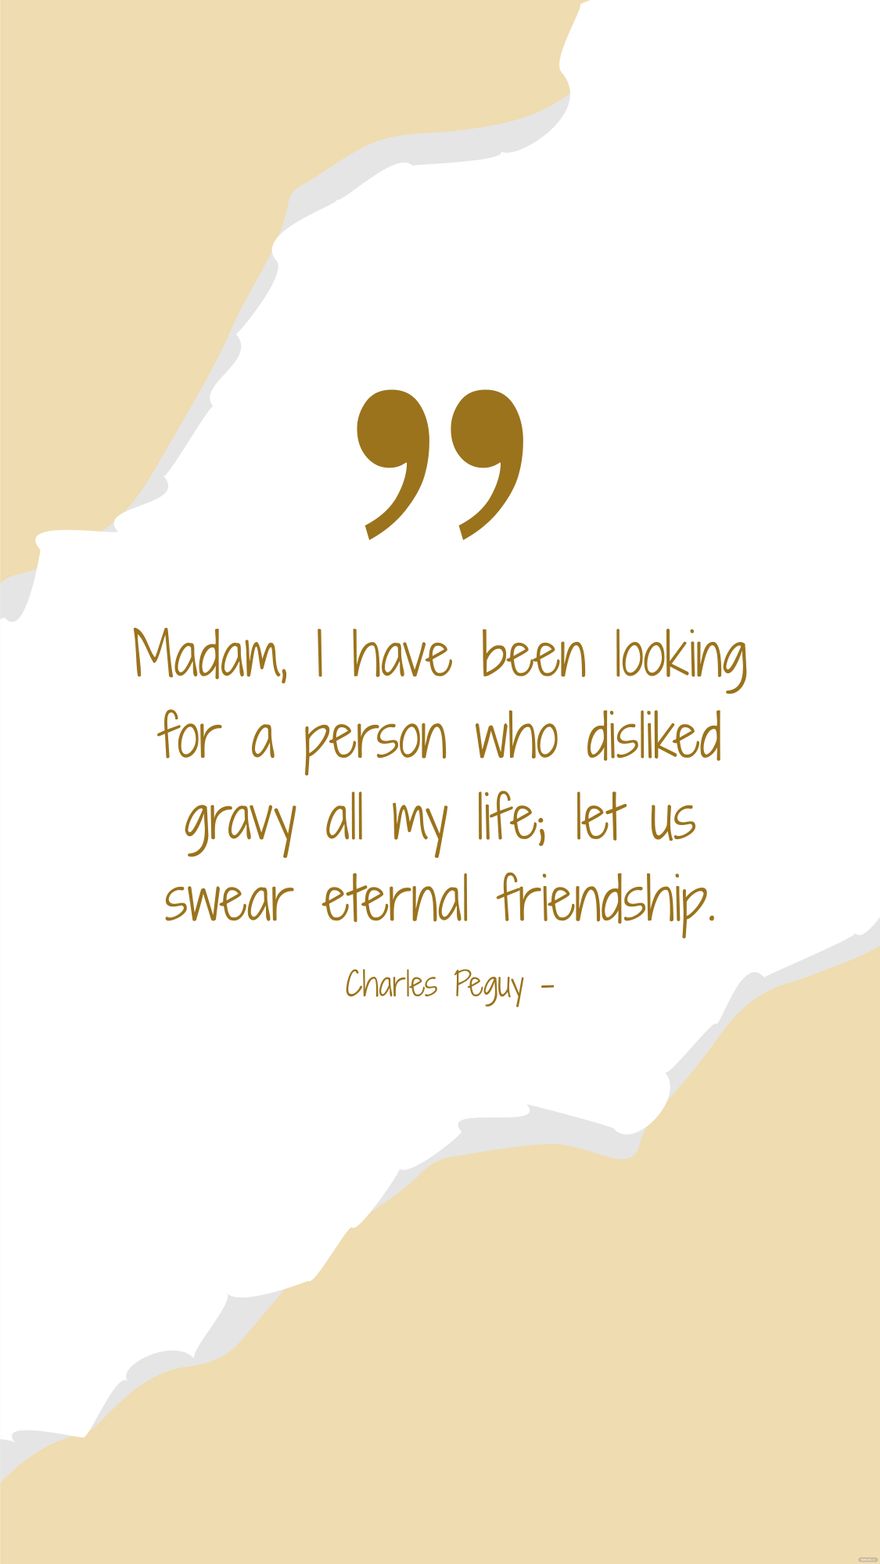 Sydney Smit - Madam, I have been looking for a person who disliked gravy all my life; let us swear eternal friendship.